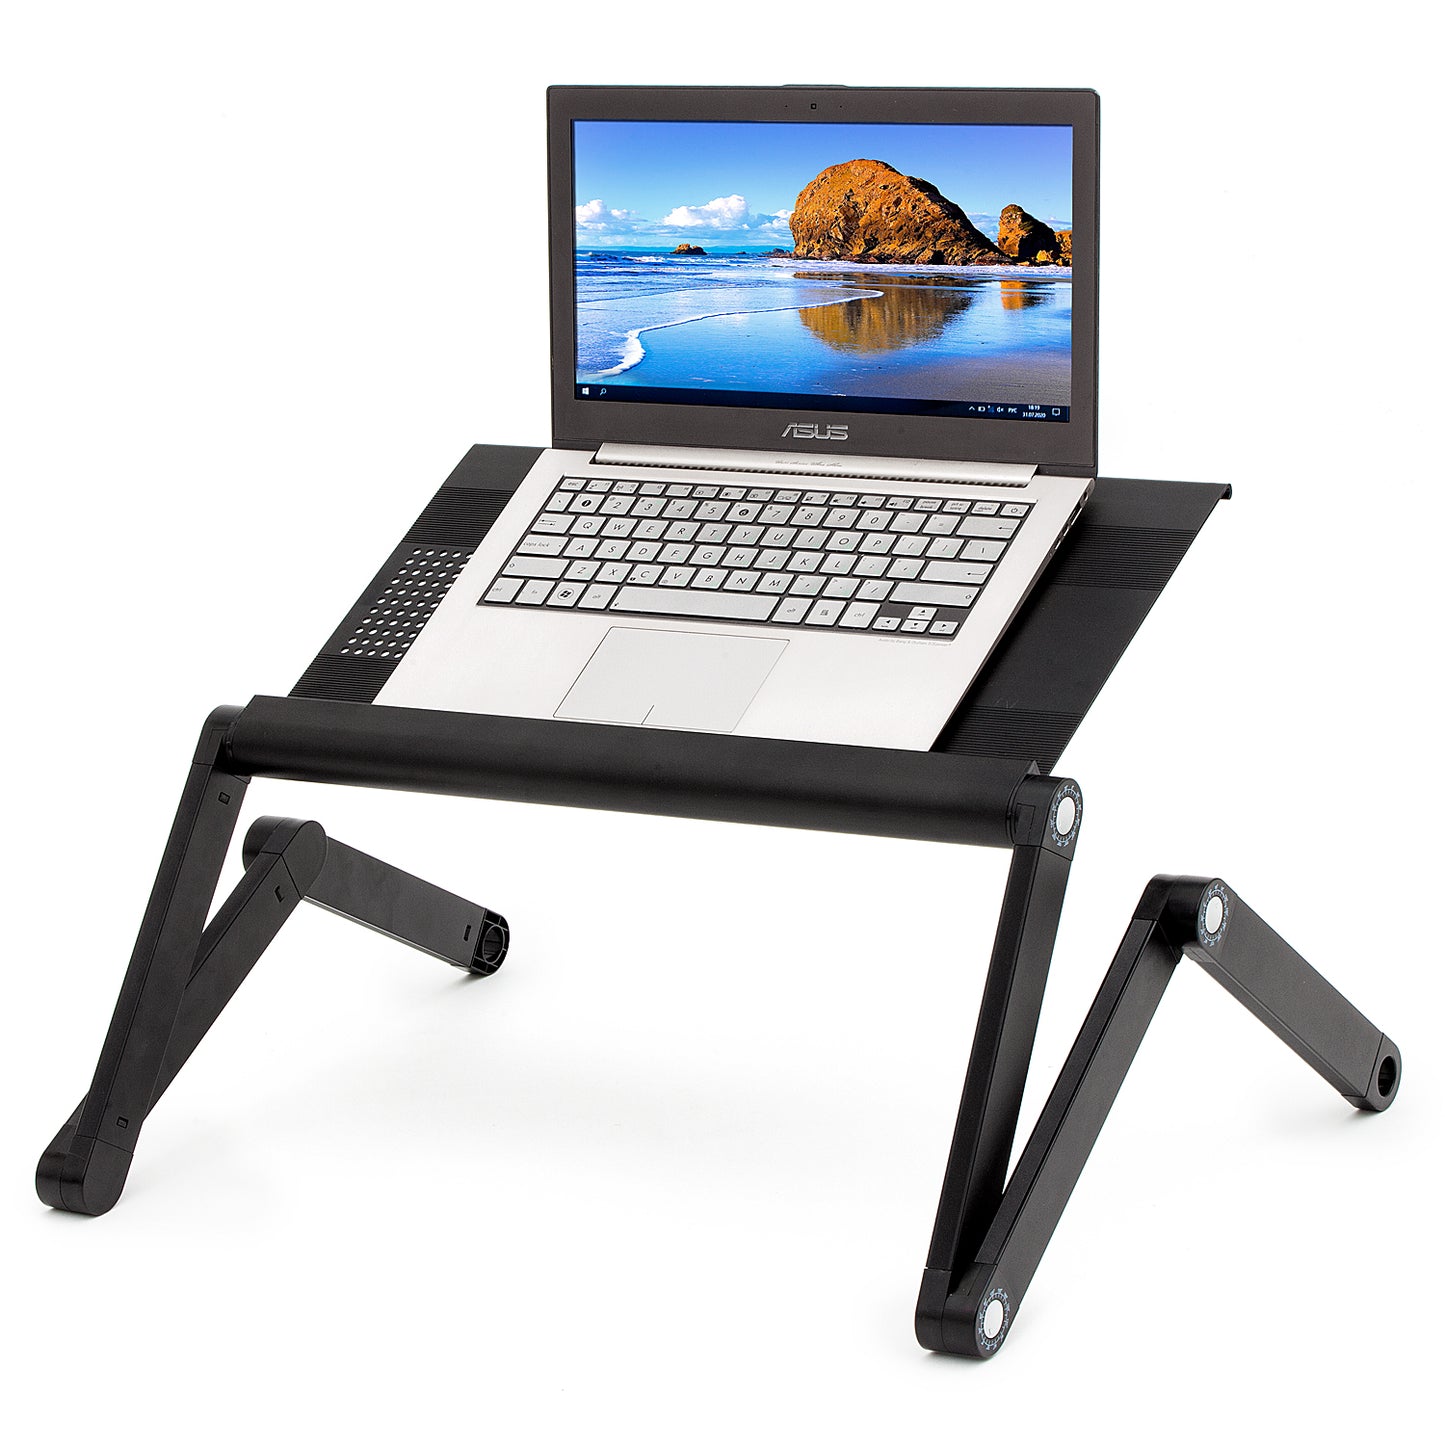 Laptop Stand, Laptop Stand for Bed, Adjustable Laptop Stand, Folding Laptop Stand, Cooling Tray, WonderWorker Nobel, 3